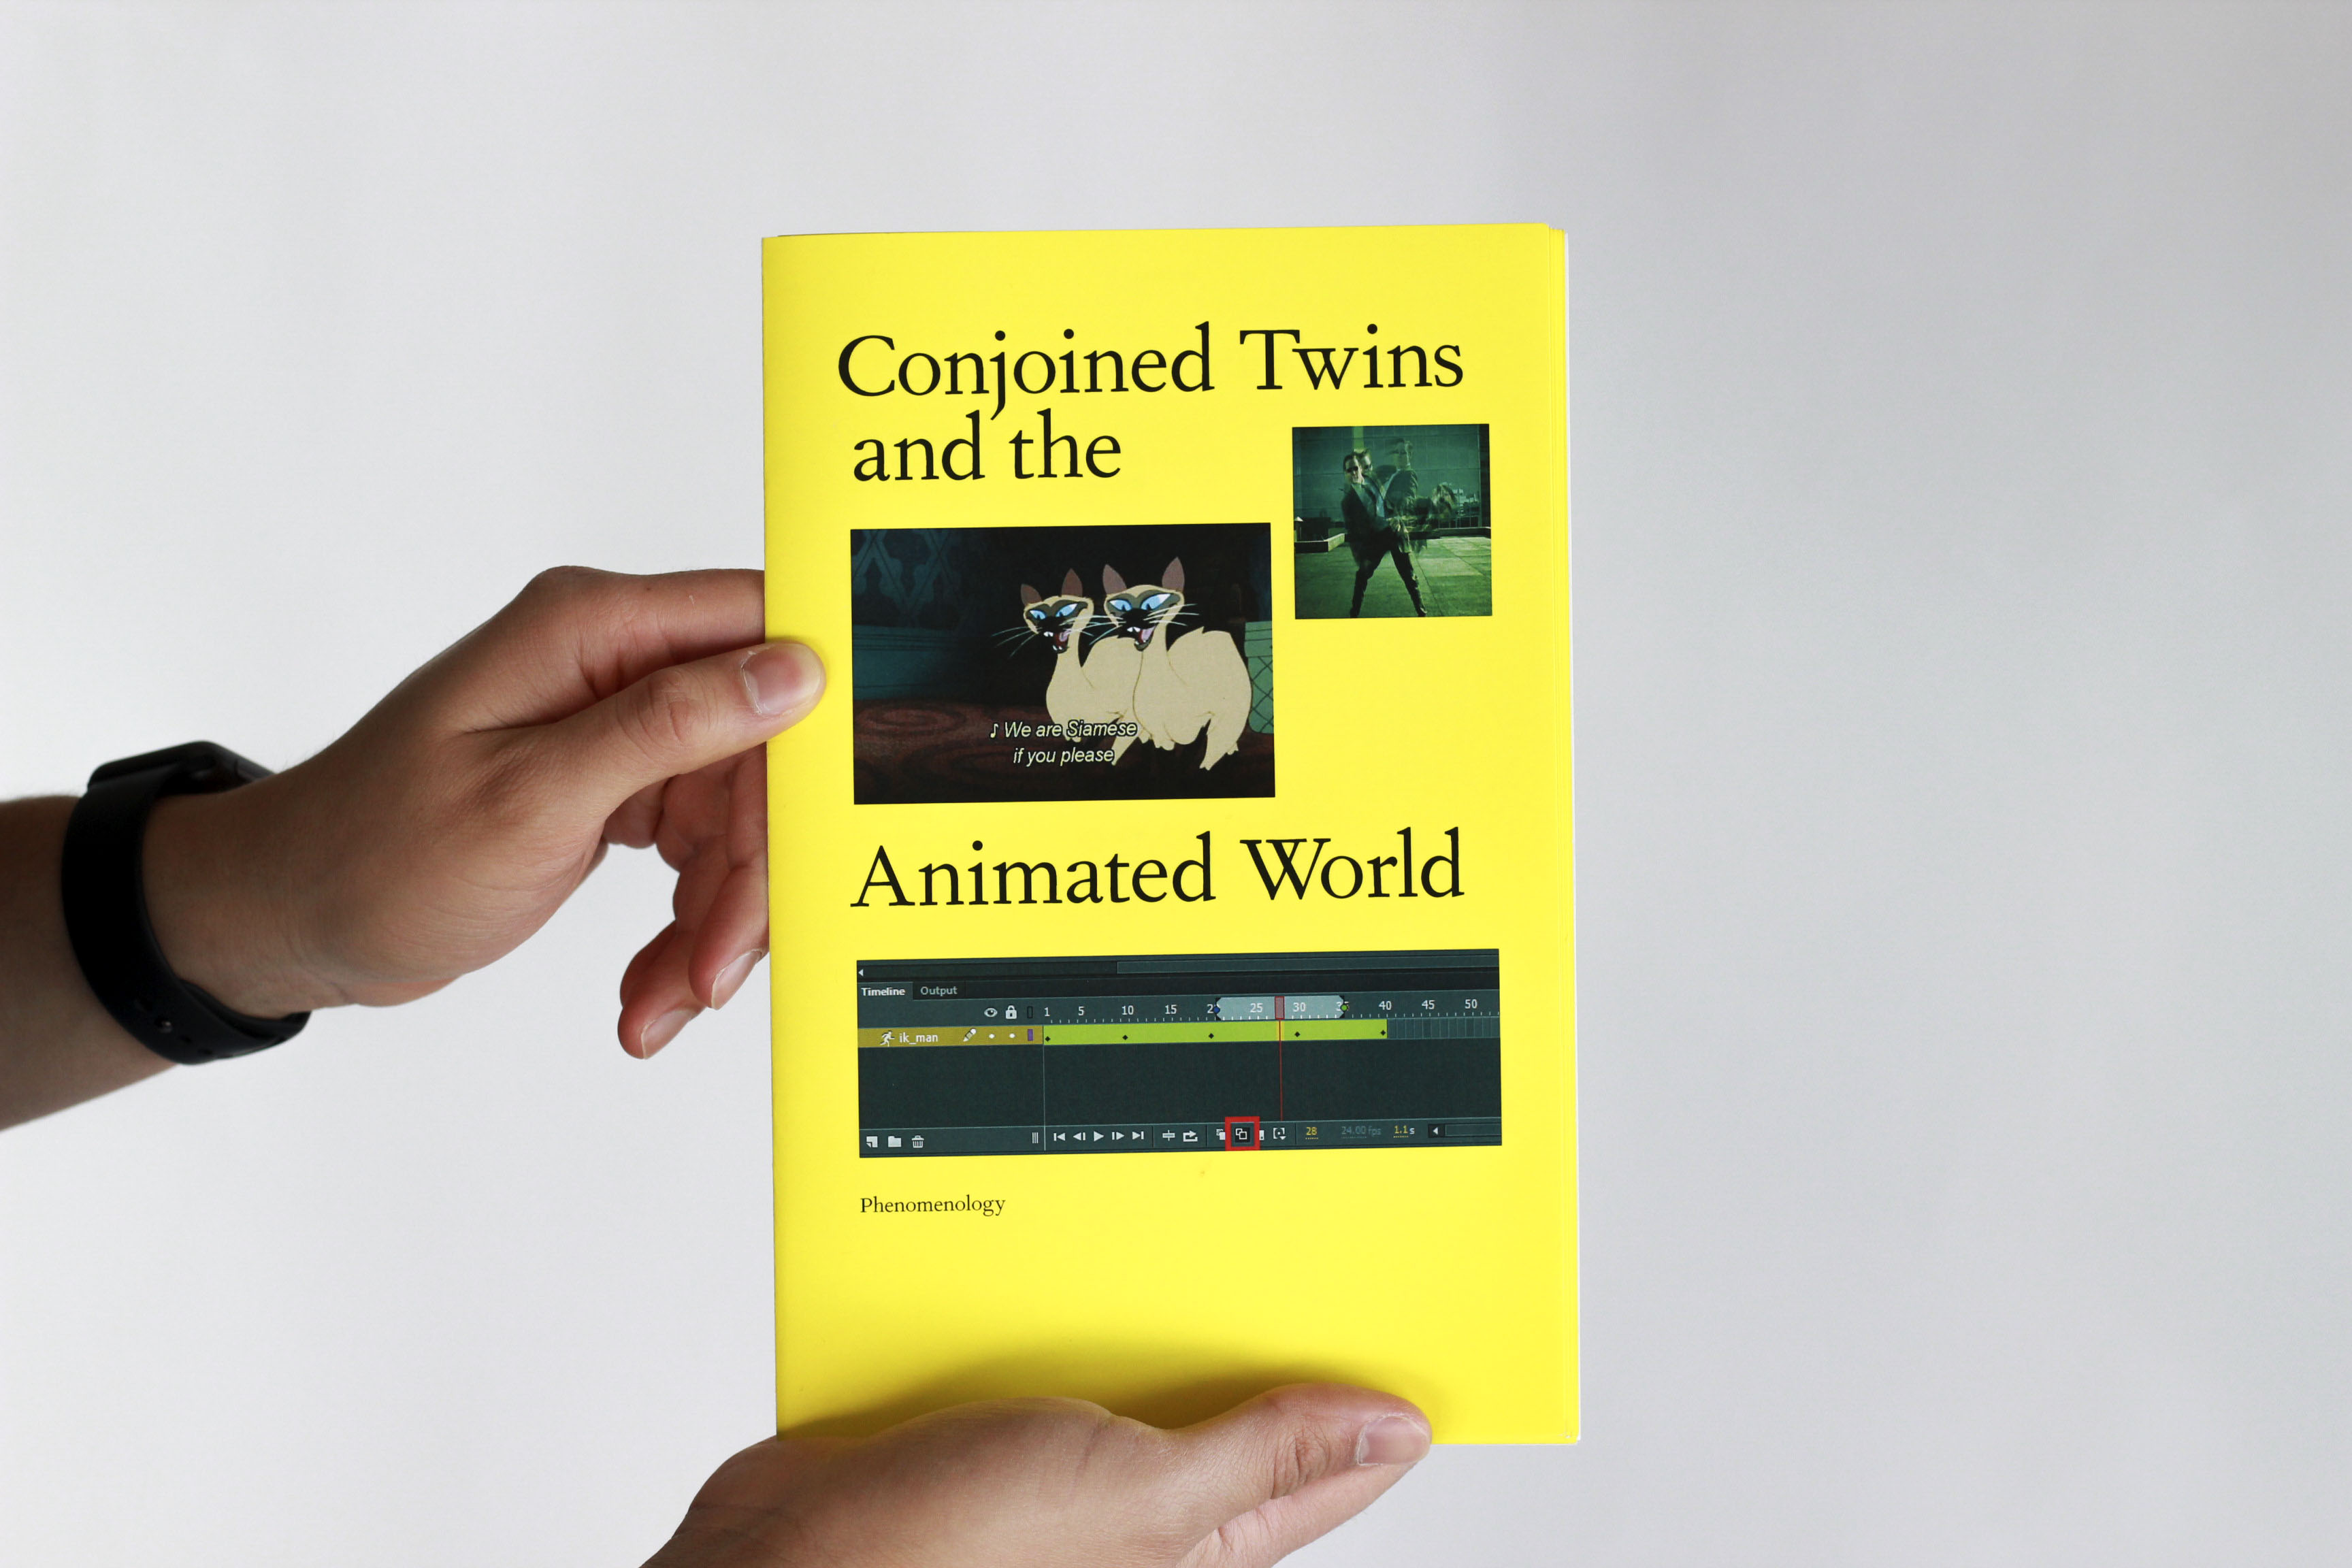 Conjoined Twins and the Animated World